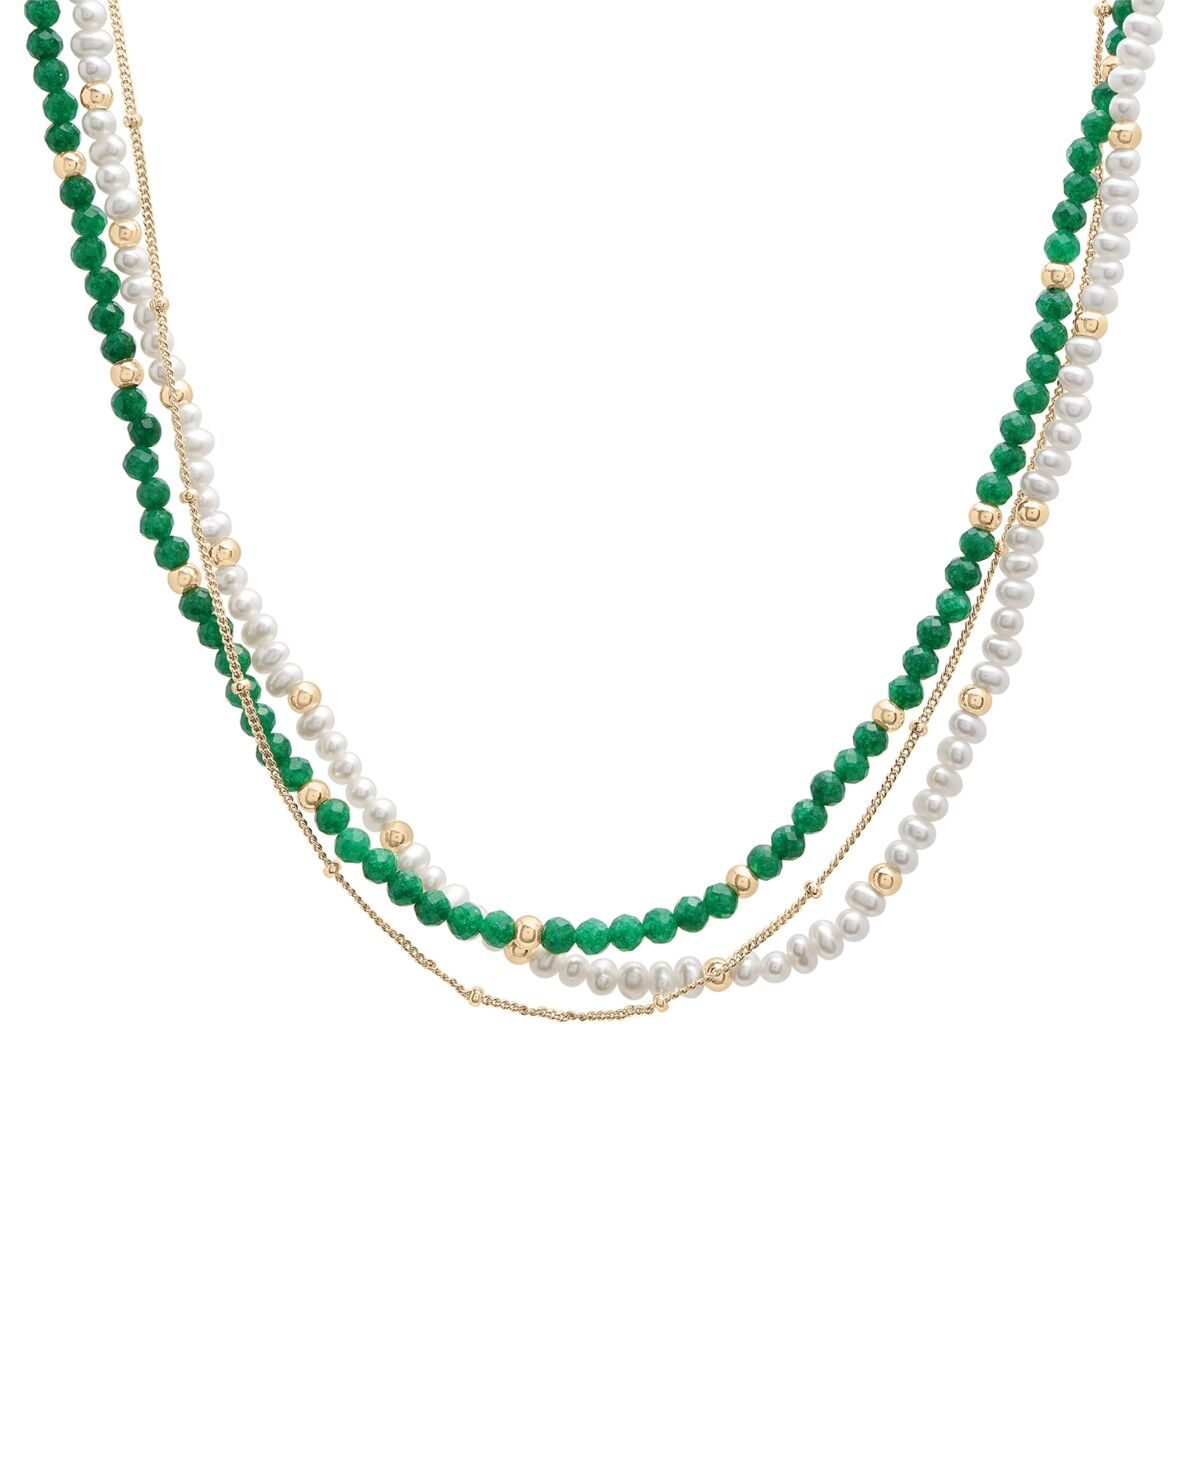 Macy's Cultured Freshwater Pearl (3 - 3-1/2mm), Jade, & Beaded Chain Triple Strand Layered Necklace in 14k Gold-Plated Sterling Silver, 16-1/4 + 1